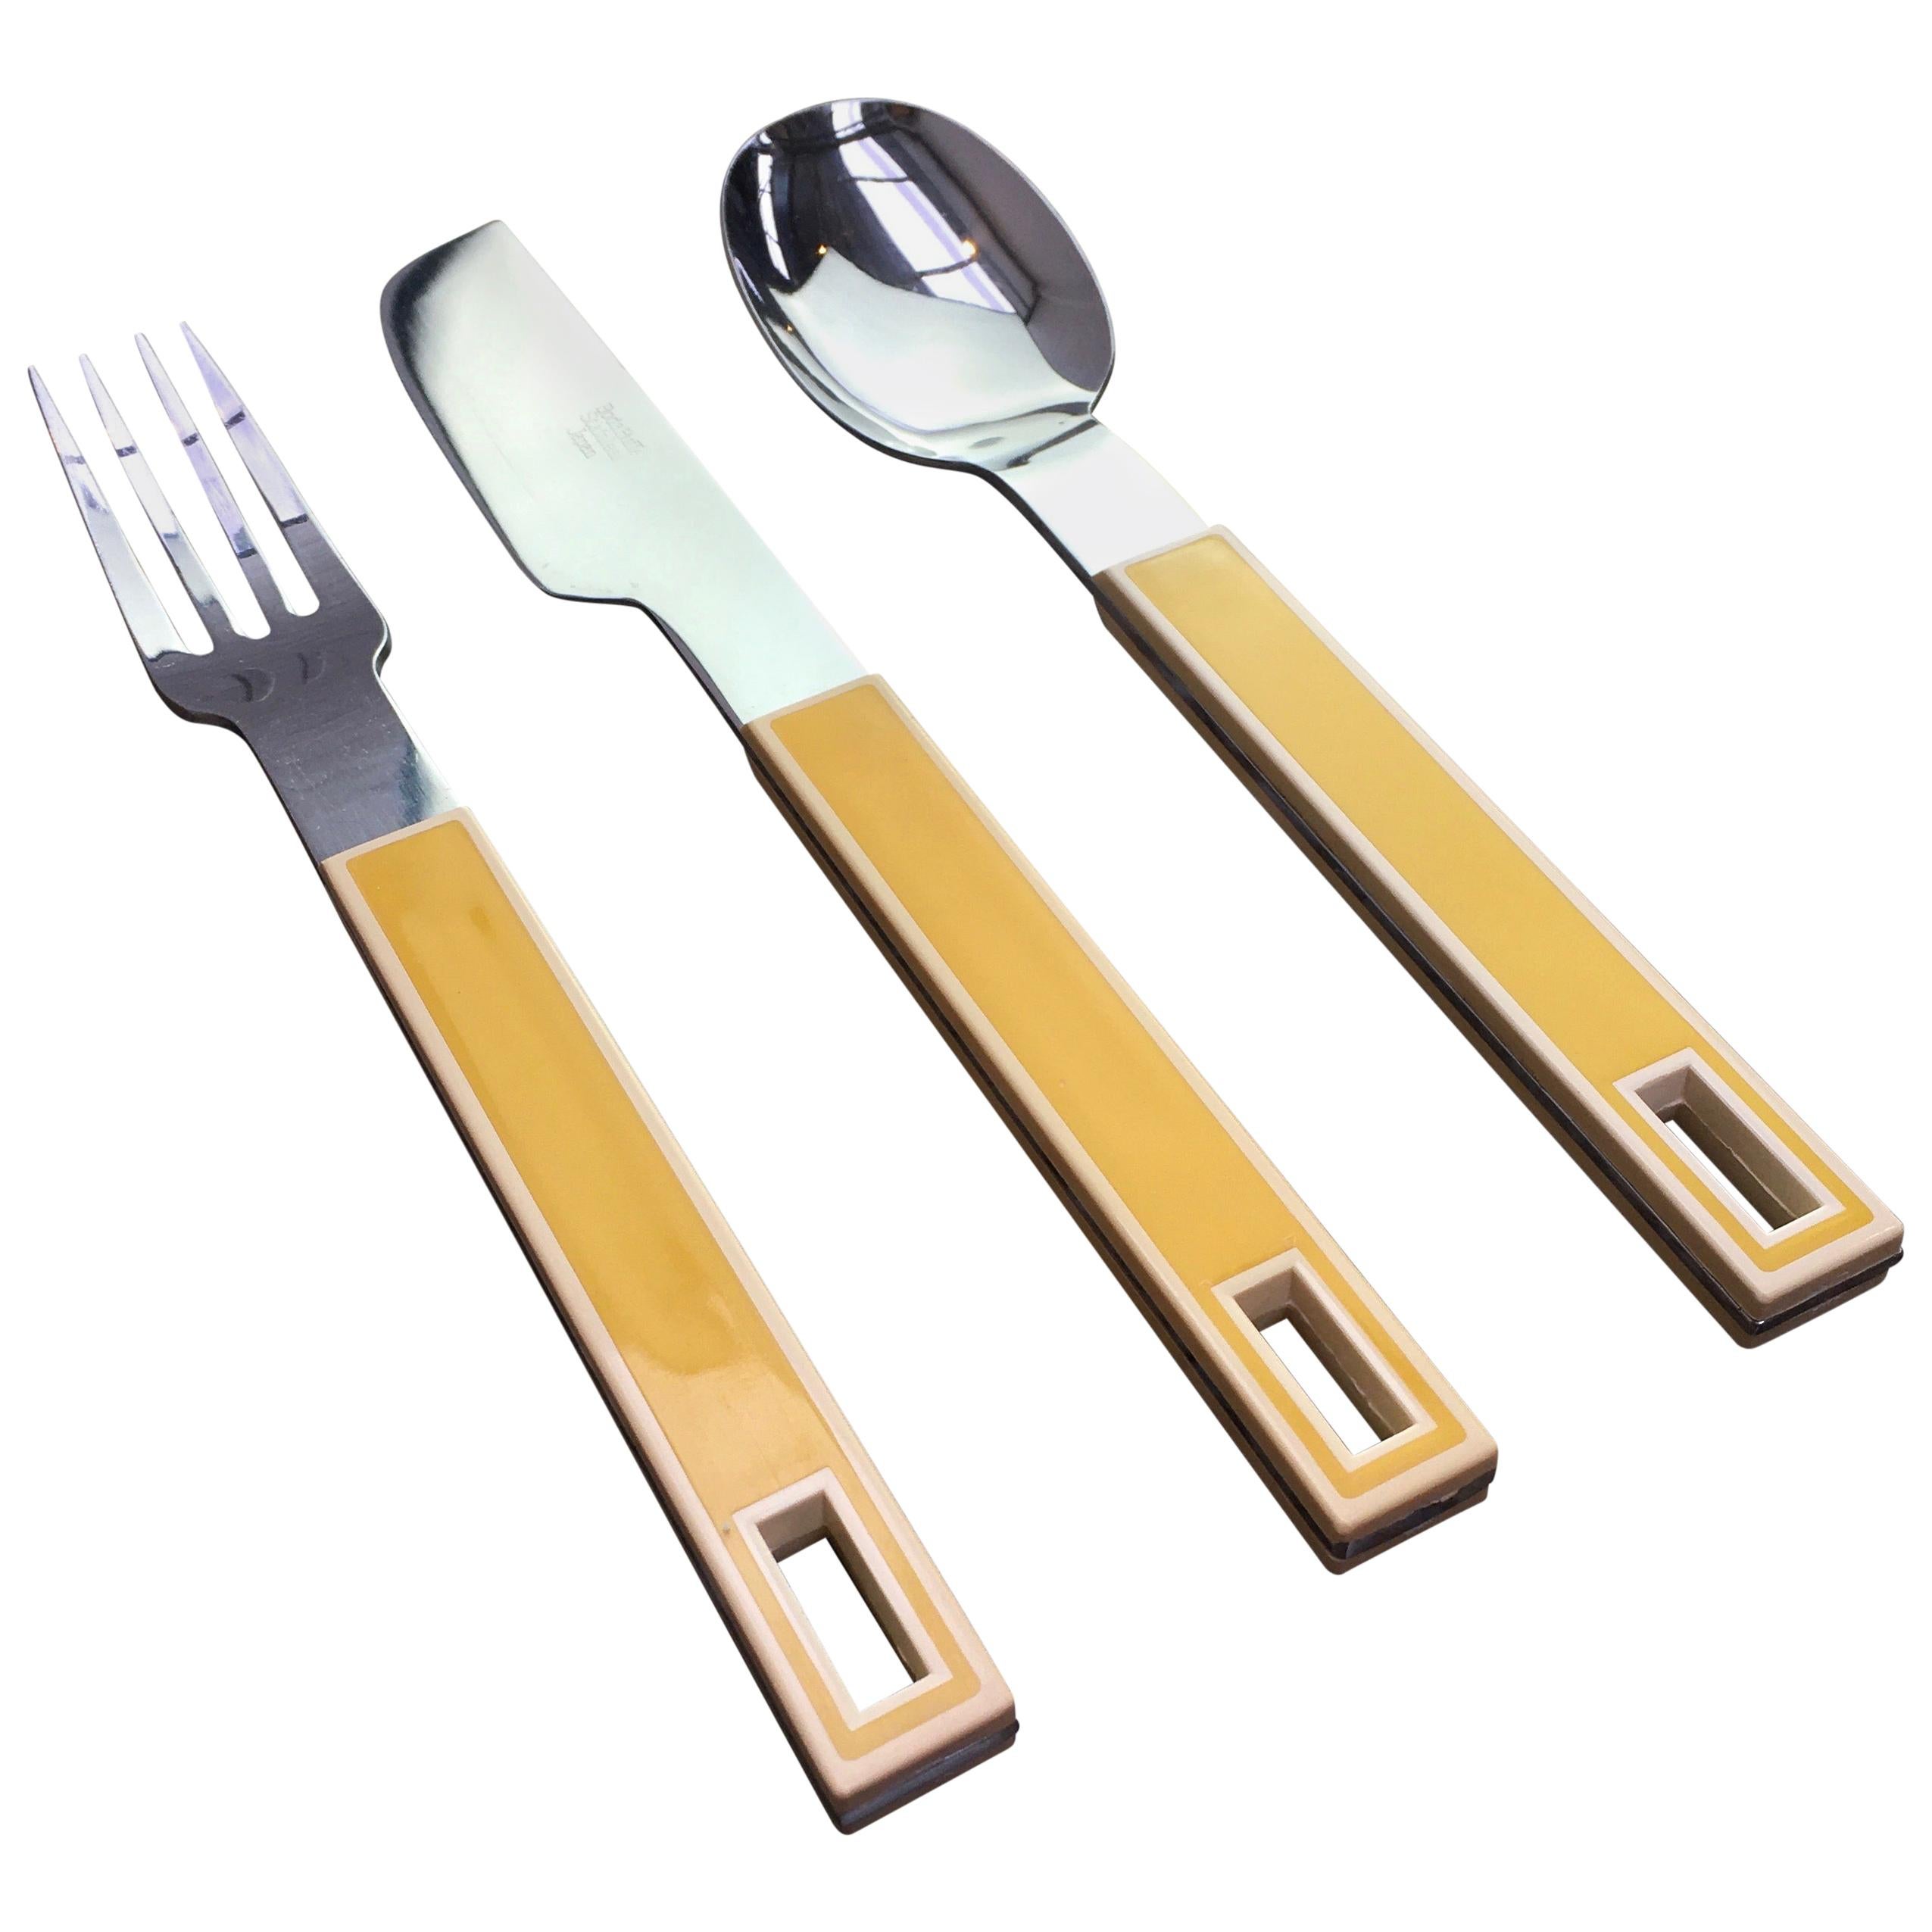 https://a.1stdibscdn.com/signe-persson-melin-cutlery-set-for-six-boda-buffe-sweden-made-in-japan-c1972-for-sale/1121189/f_176490521579621824482/17649052_master.jpeg